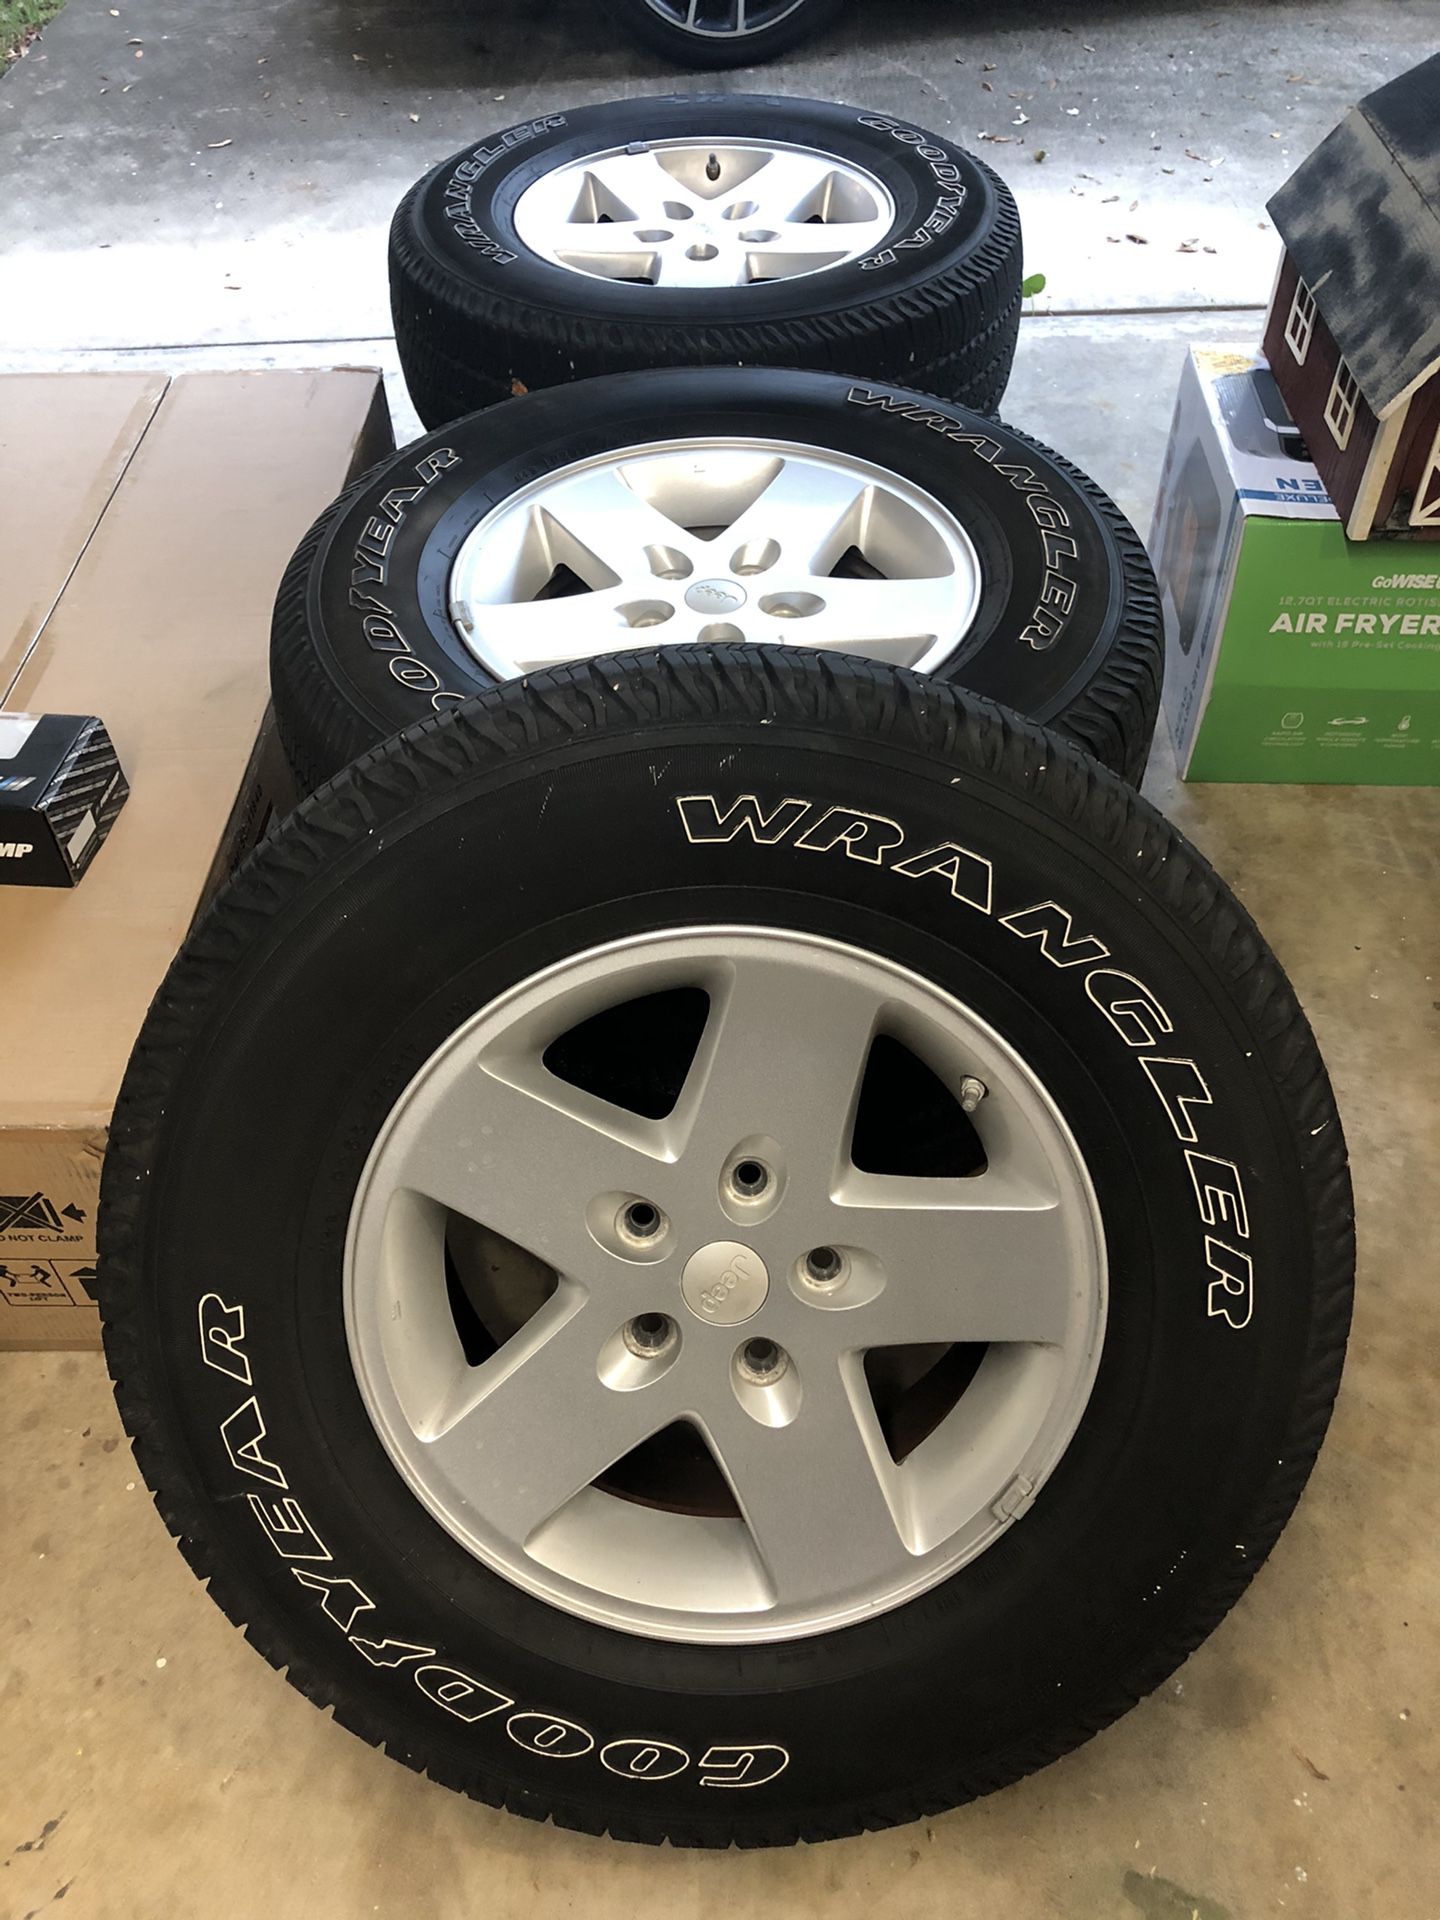 5-17” Jeep Wrangler wheels and tires with TPMS sensors